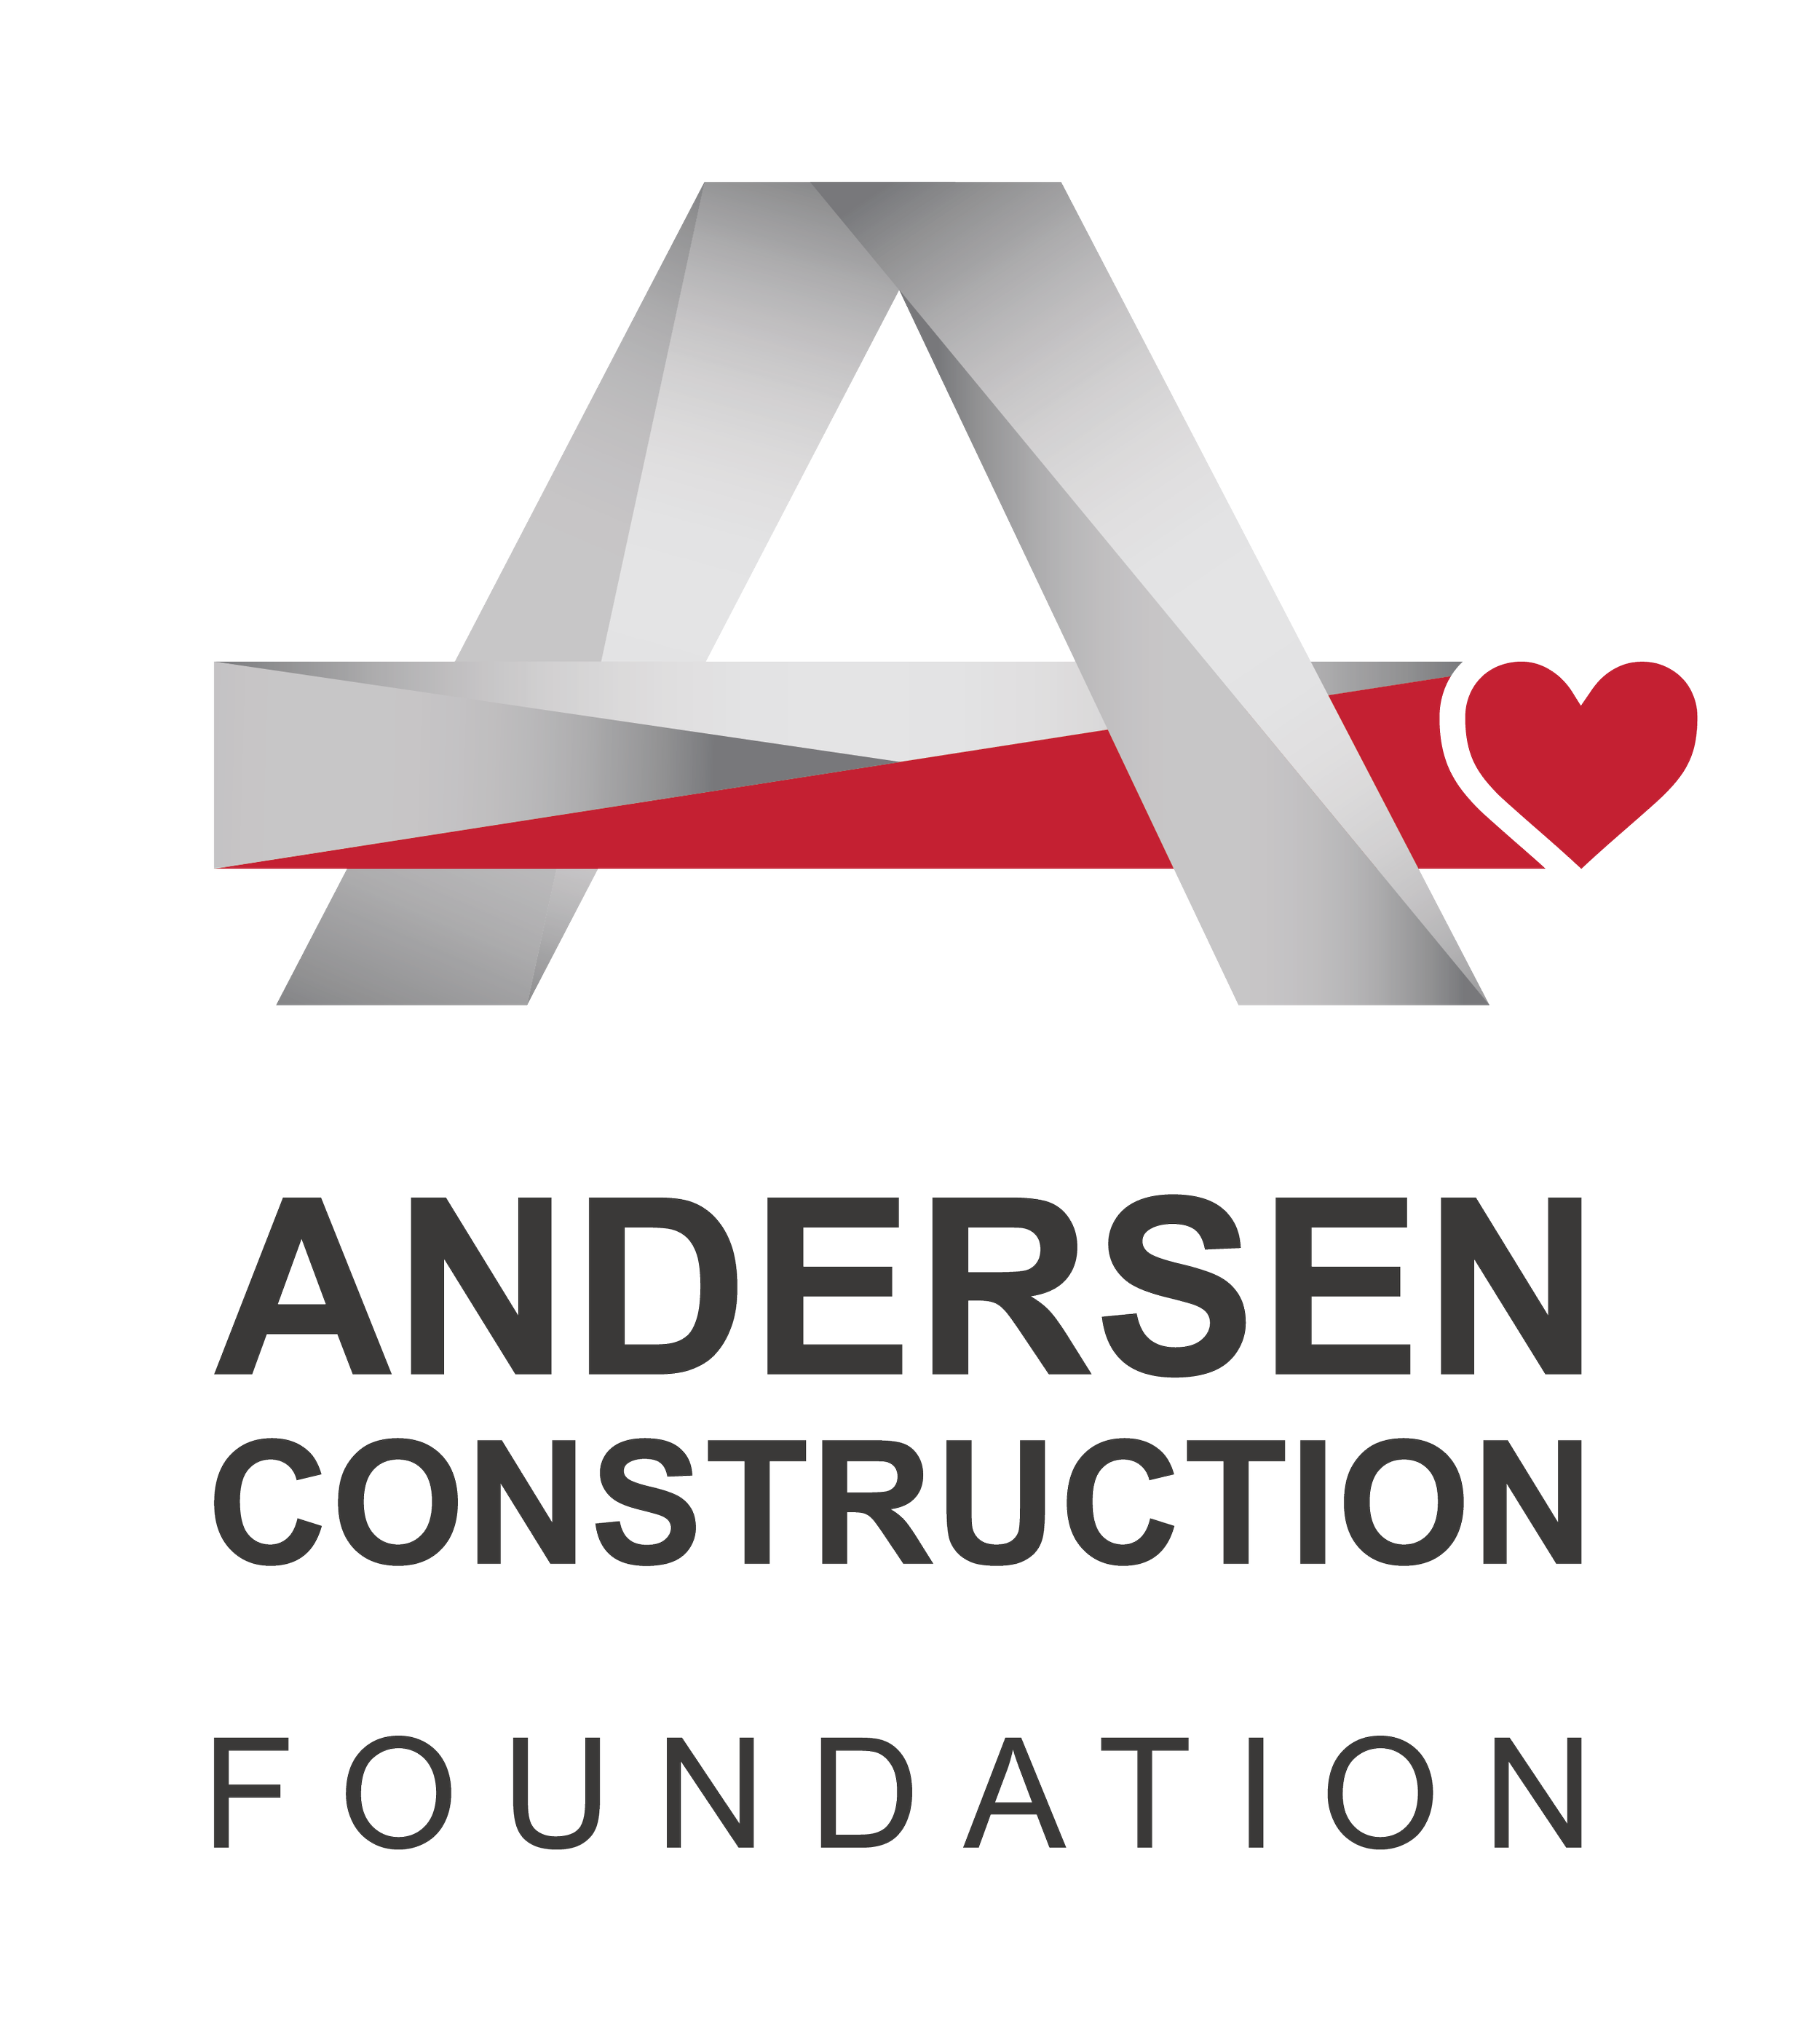 Andersen Construction Foundation Logo - STACKED-01.png